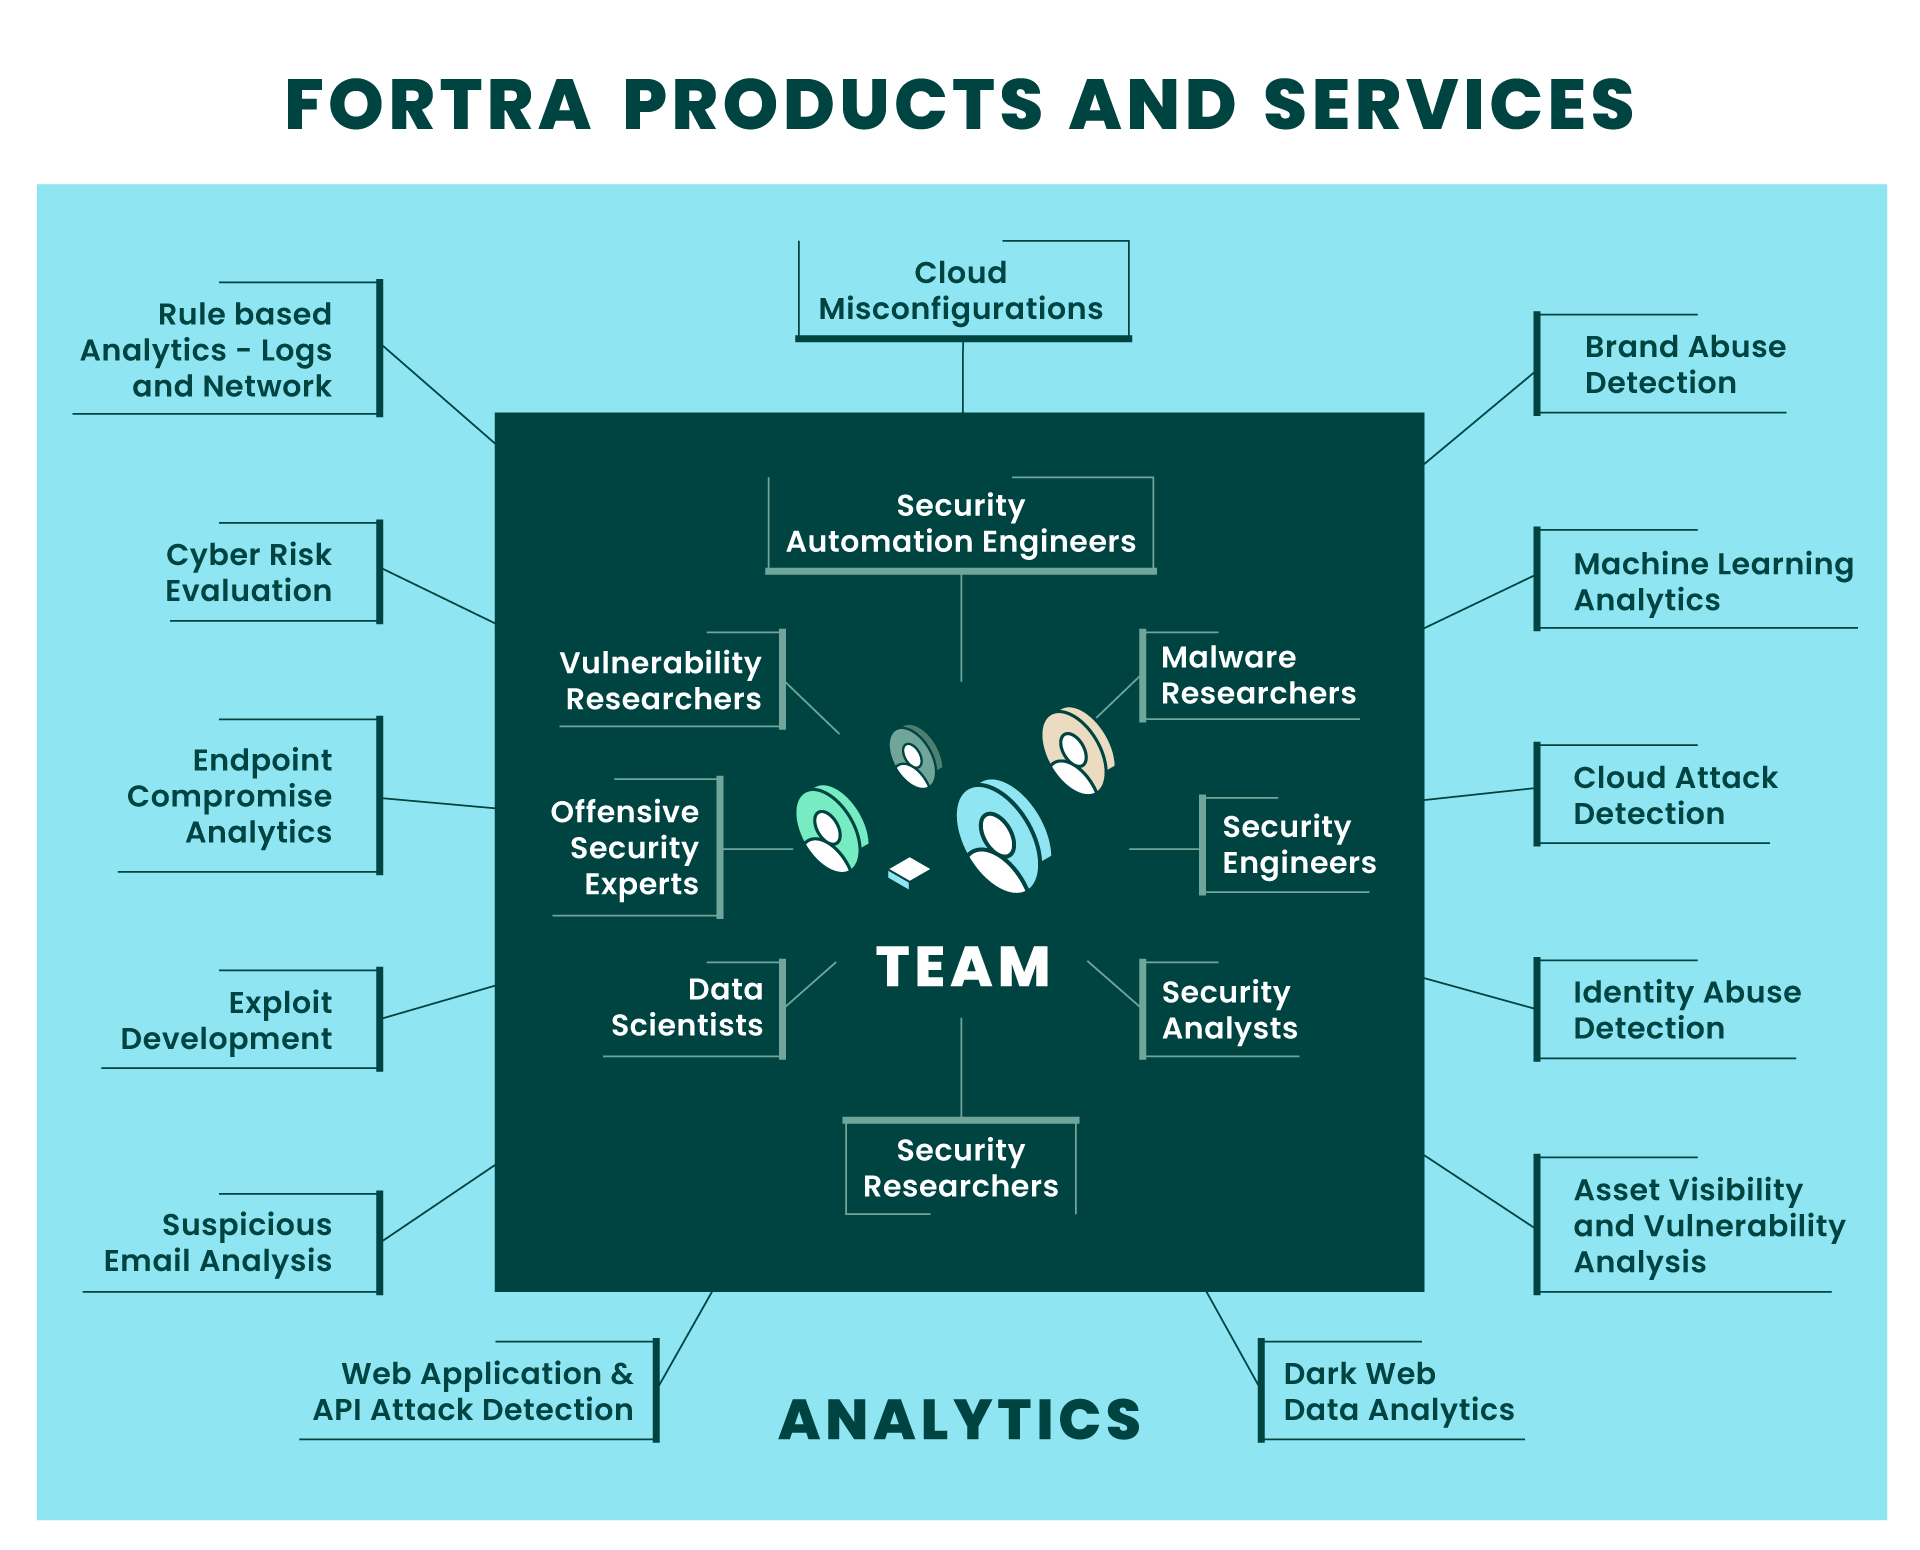 Fortra products and services